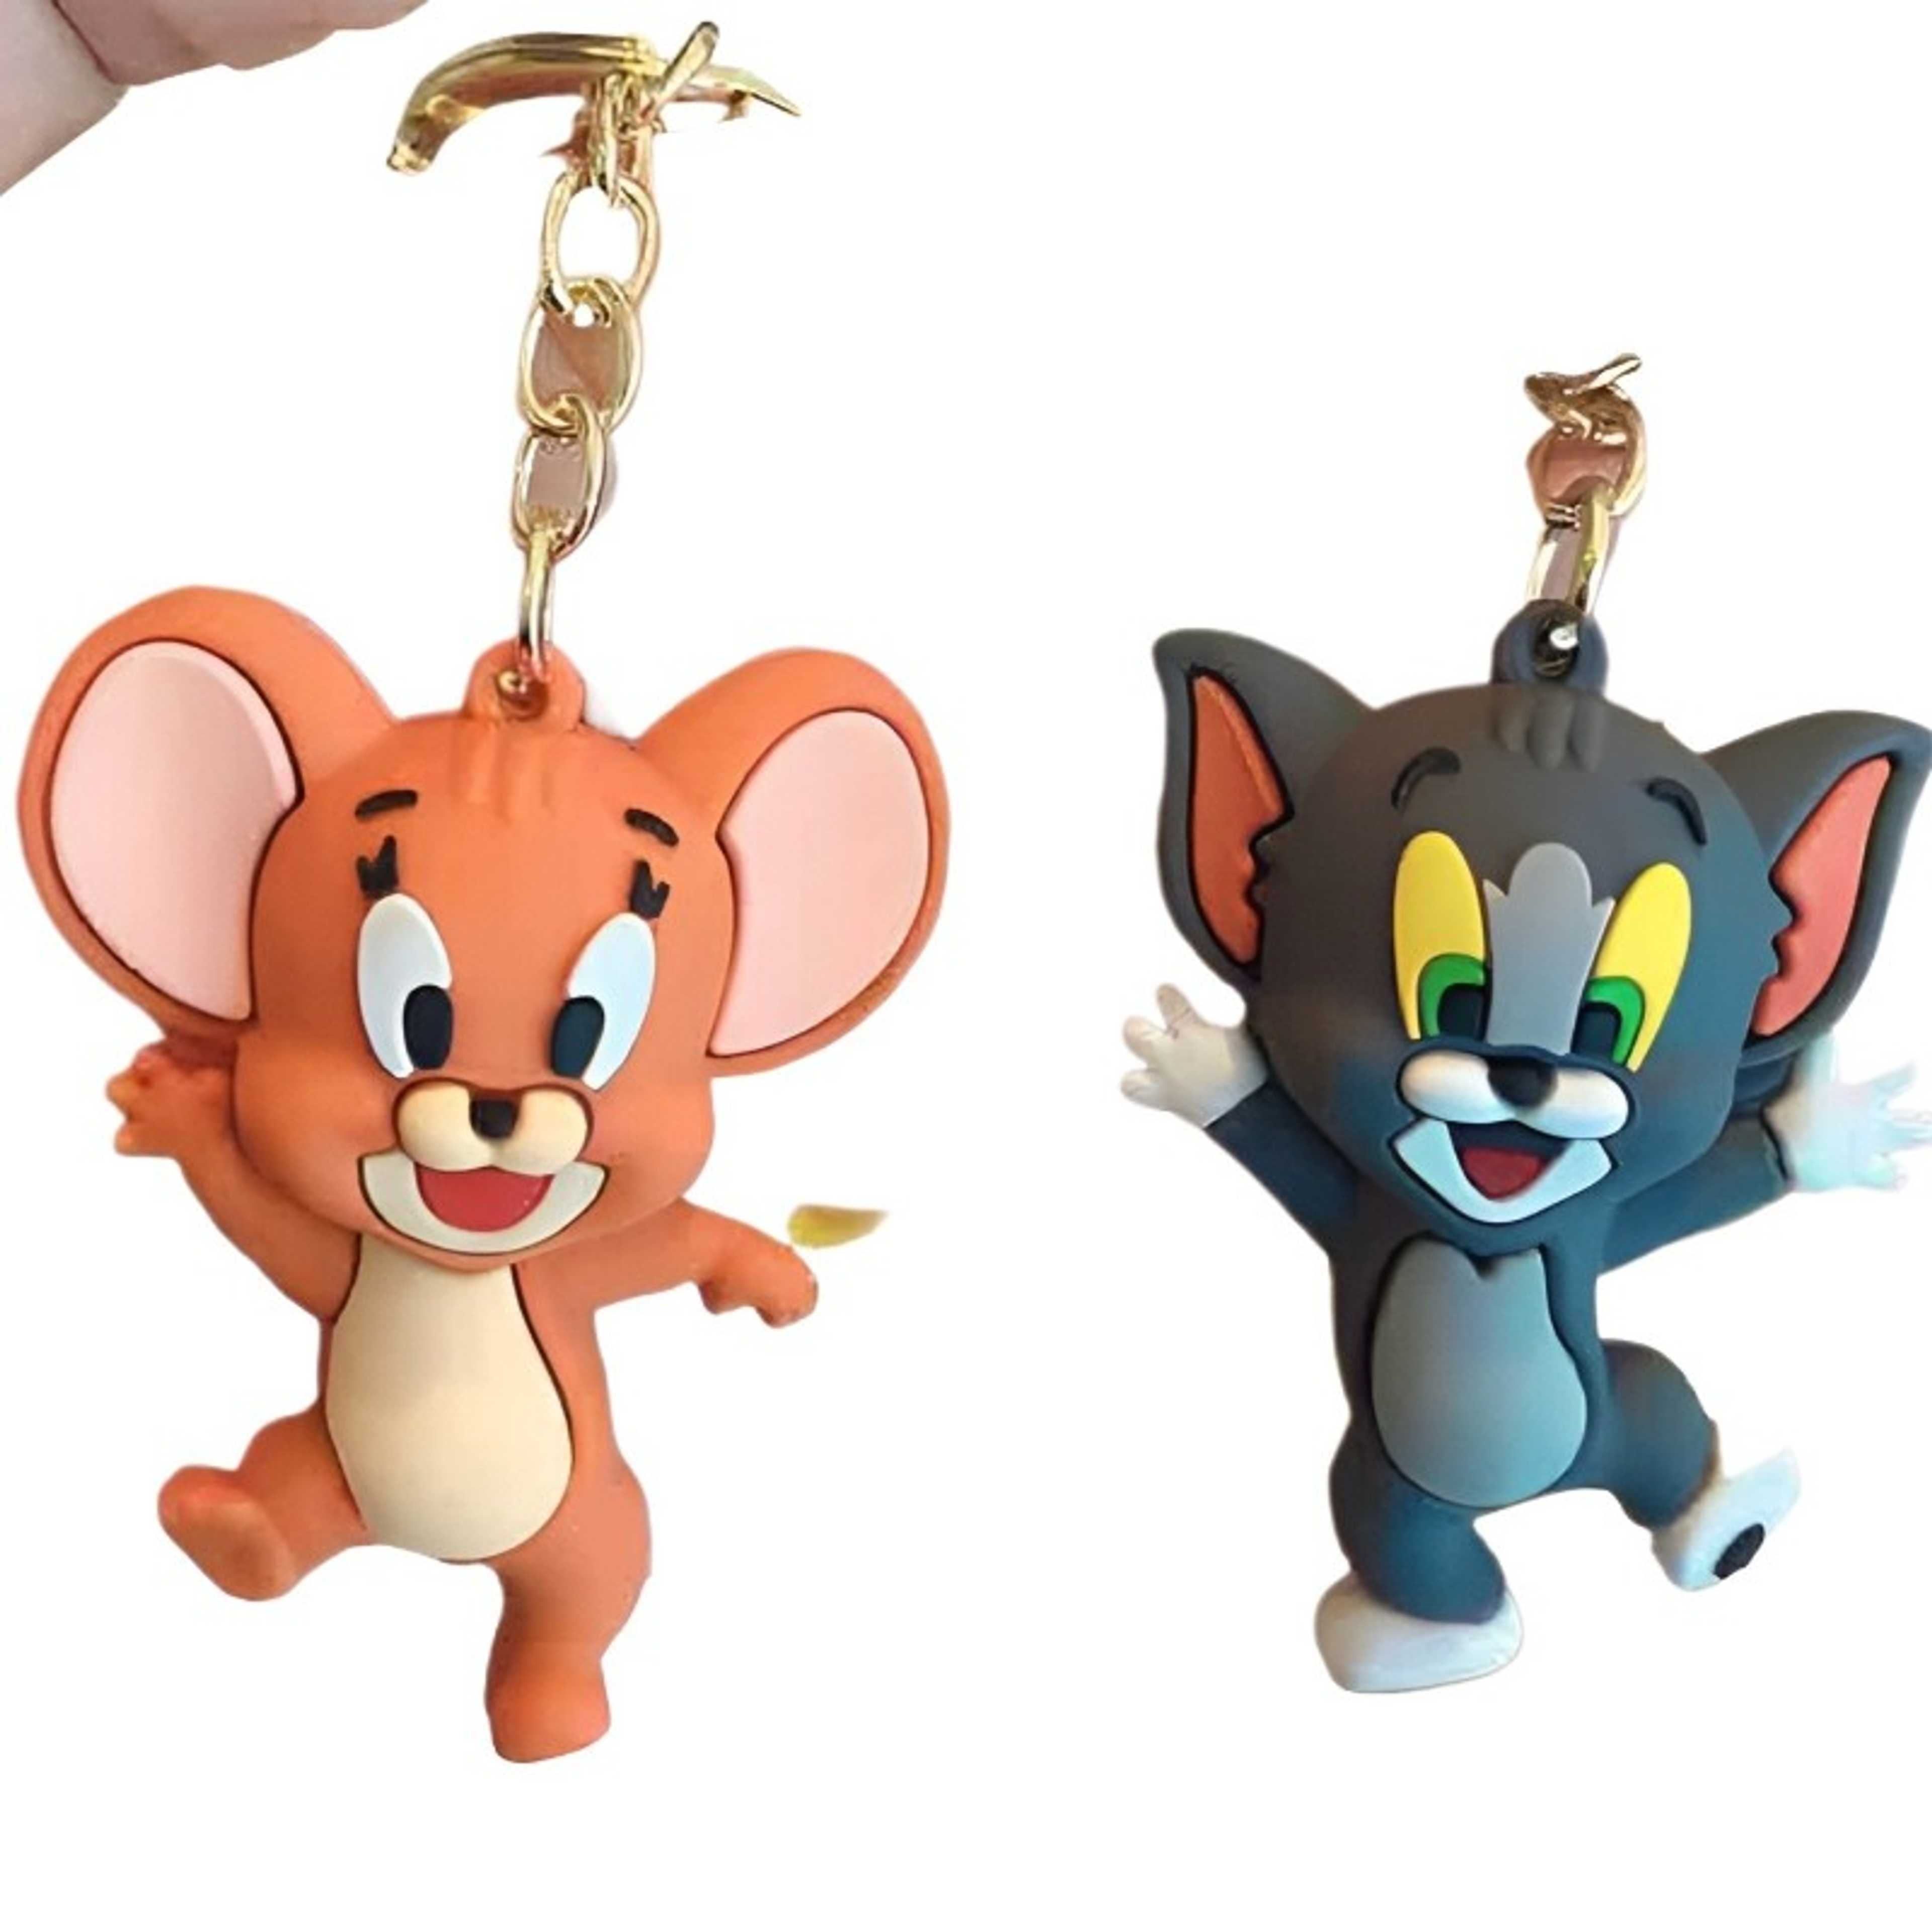 keychain Tom & jerry Cute 3D Tom and Jerry Keychain Key Chain Silver Colour Keychain for men & Women keychain Keychain For Fashion Women Girls Tassel Bag Fluffy Bag Hanging Key